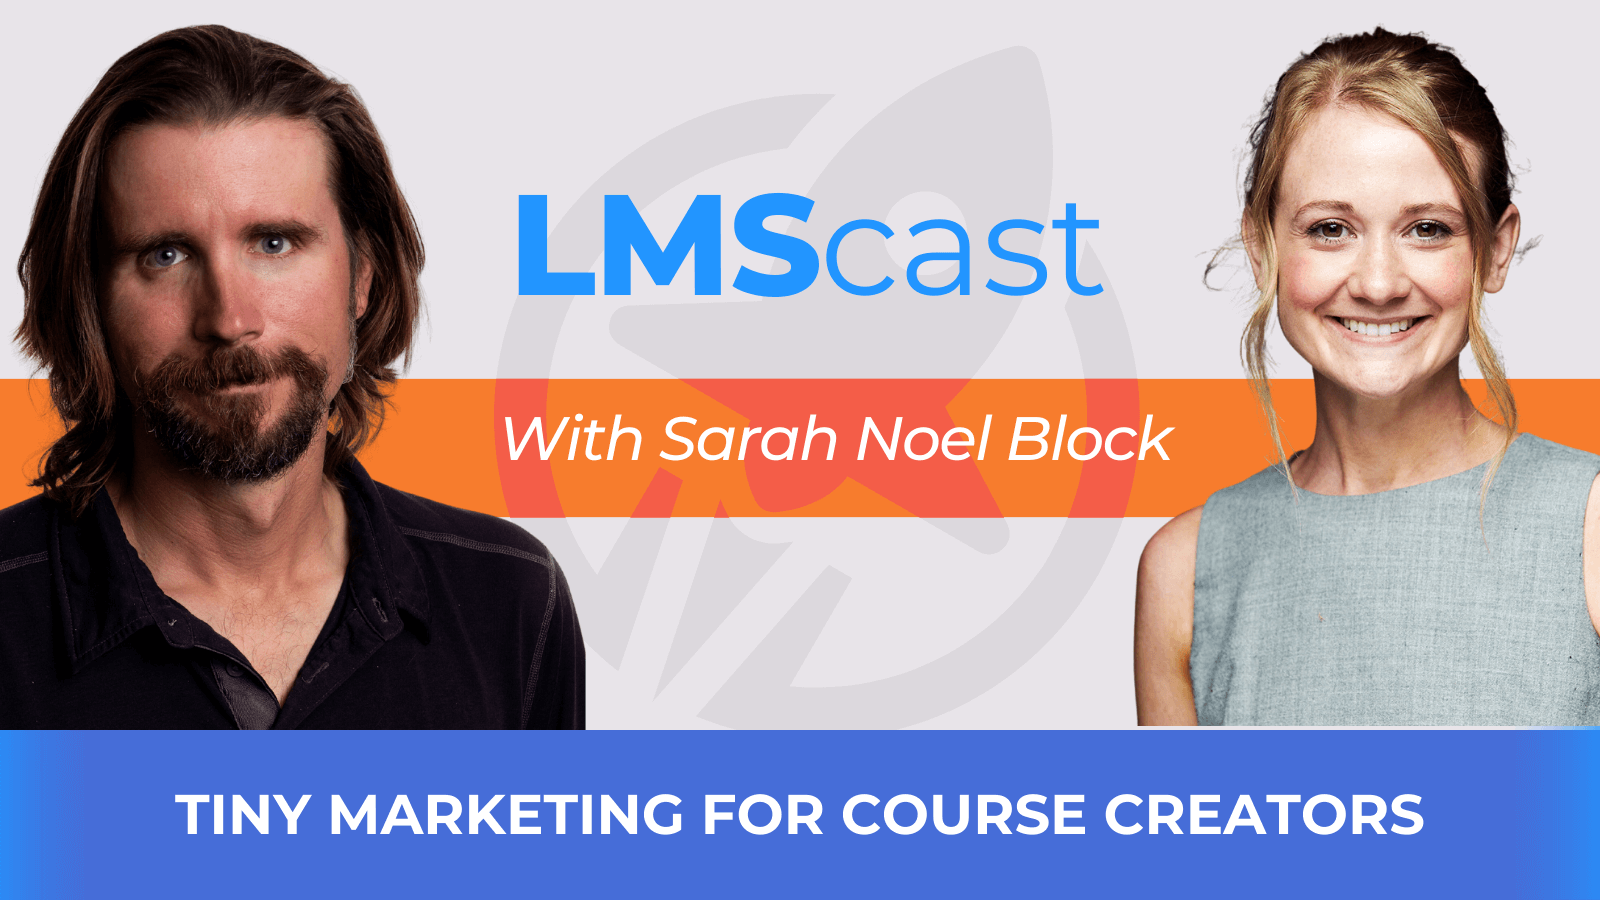 Tiny Marketing for Course Creators with Sarah Noel Block